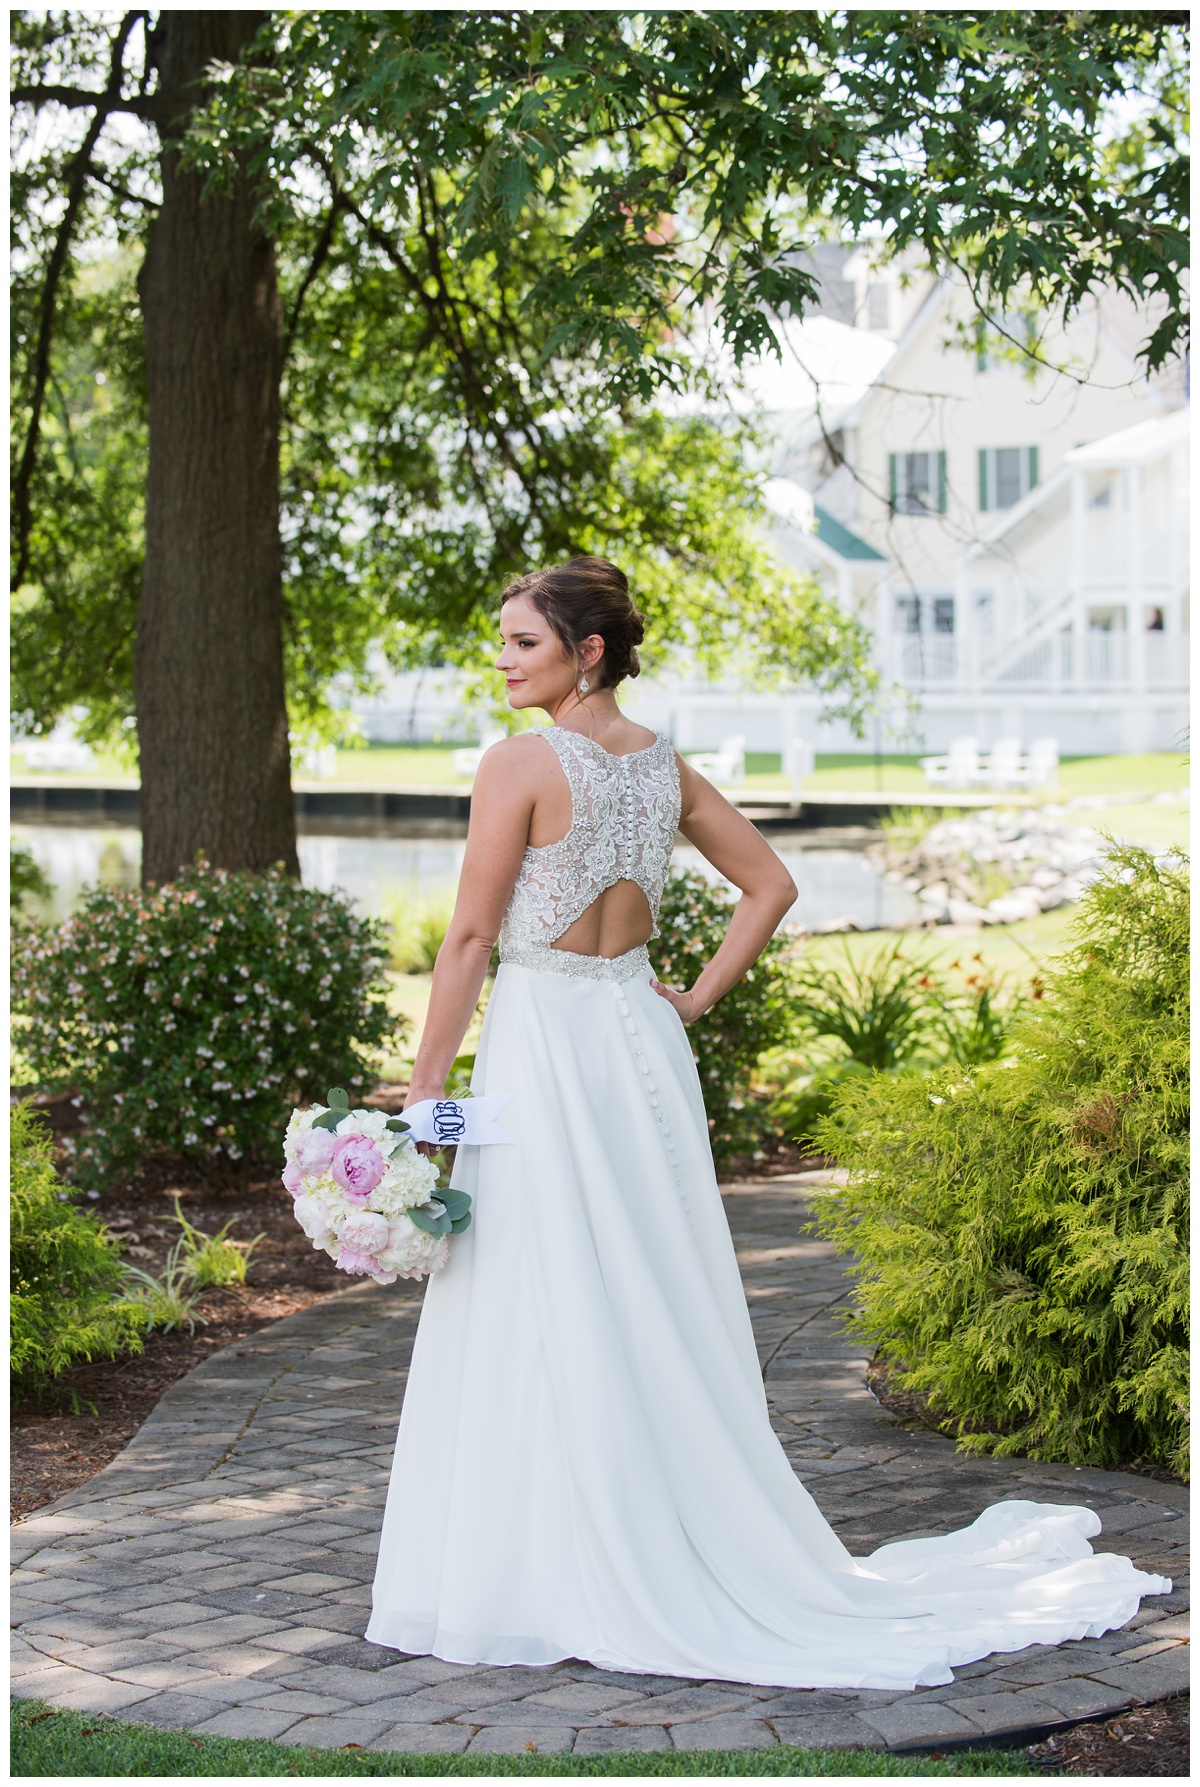 wedding dress details - bridal portrait outdoors at cove - waterfront wedding venue - the oaks waterfront inn wedding in the summer - light pink and white floral bouquet and back of sequin and lace wedding gown - floor length - with buttons and cut out back details